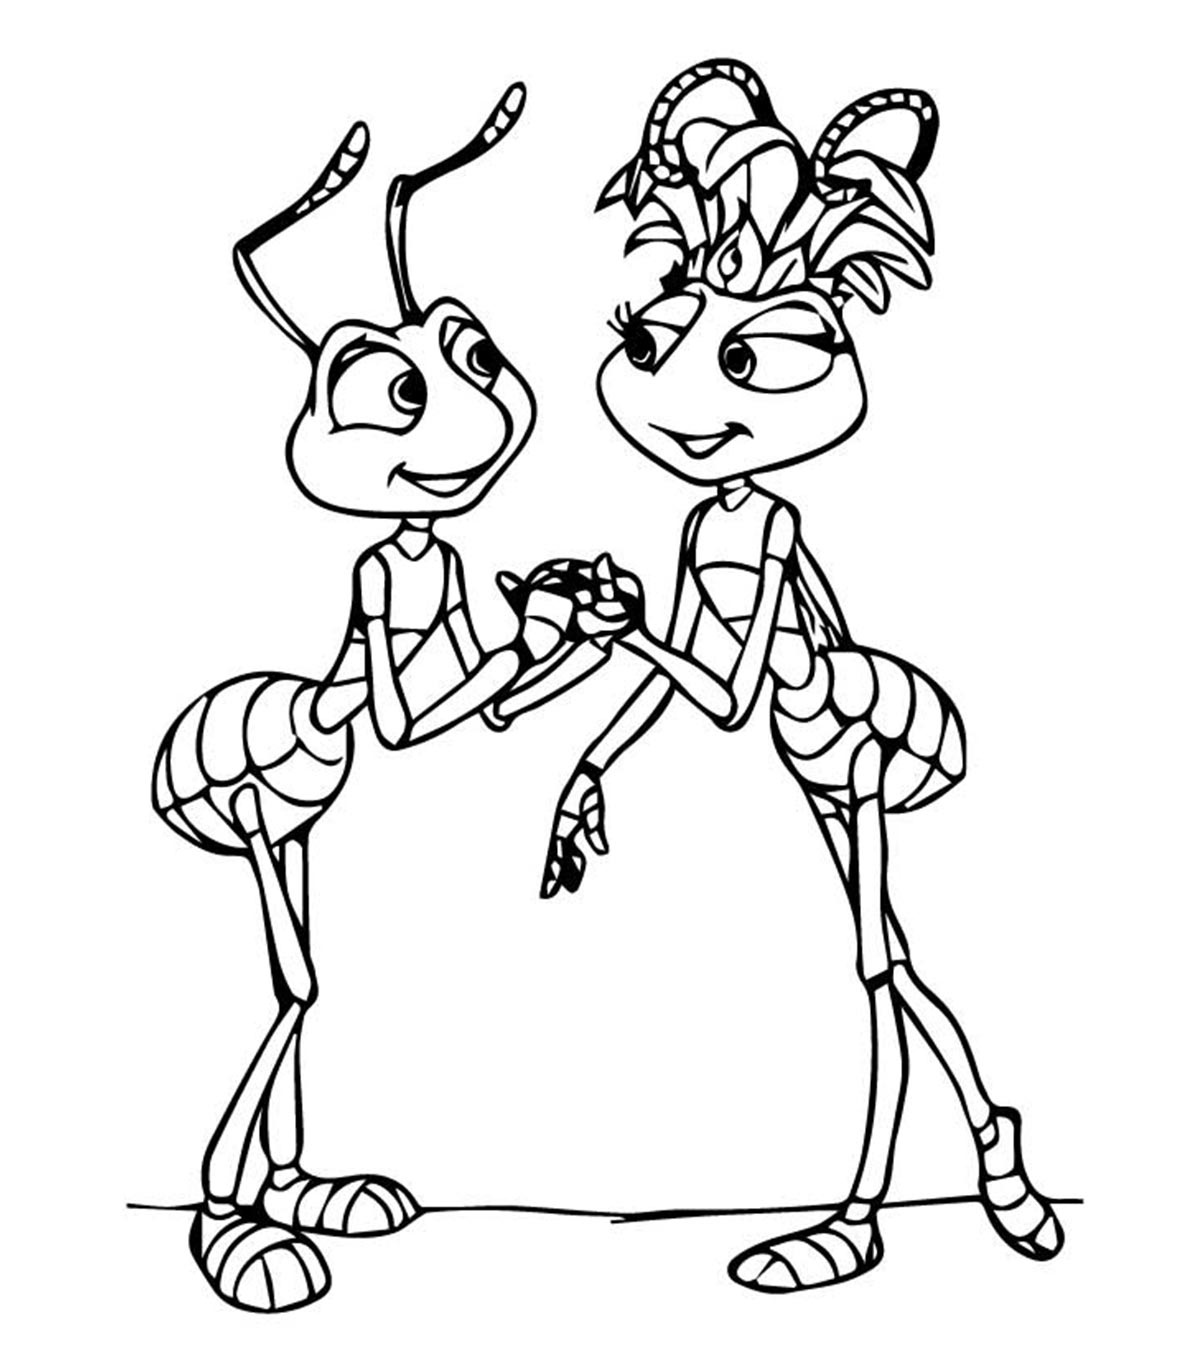 25 Theme Based Ants Coloring Pages Your Toddler Will Love